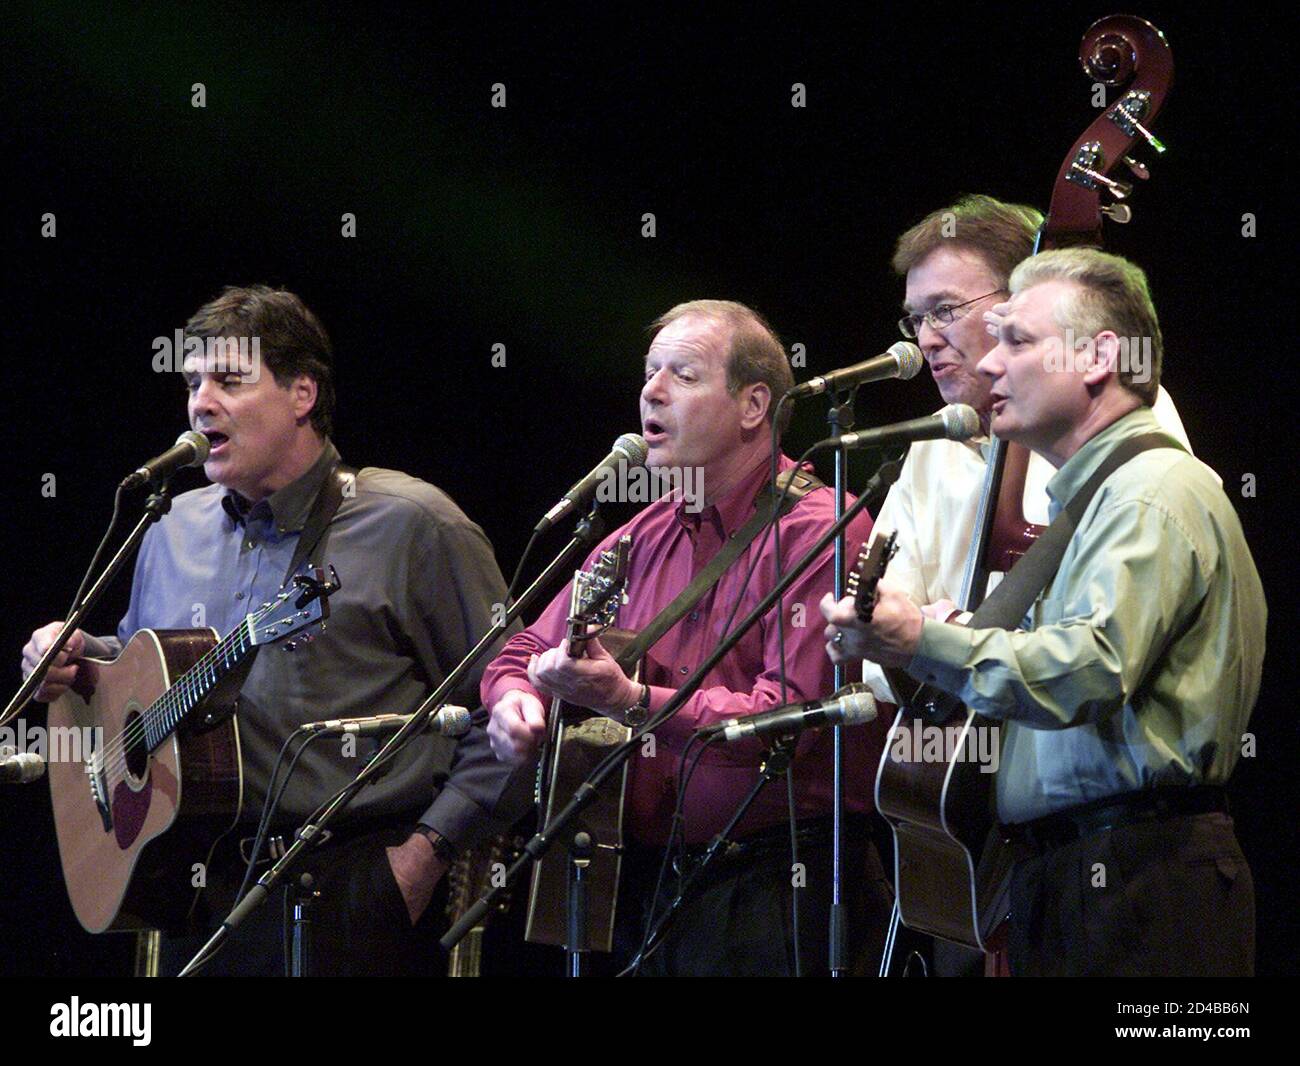 U.S. folk band The Brothers Four, (from left) Mark Pearson, John Paine, Bob Flick and Terry Lauber, performs in Hong Kong November 24, 2001. The Brothers Four has sold over 50 million albums worldwide, said on Tuesday they are glad to record a song that might have a message of love, peace and harmony, and what they are singing has new and fresh meaning after four decades. Stock Photo